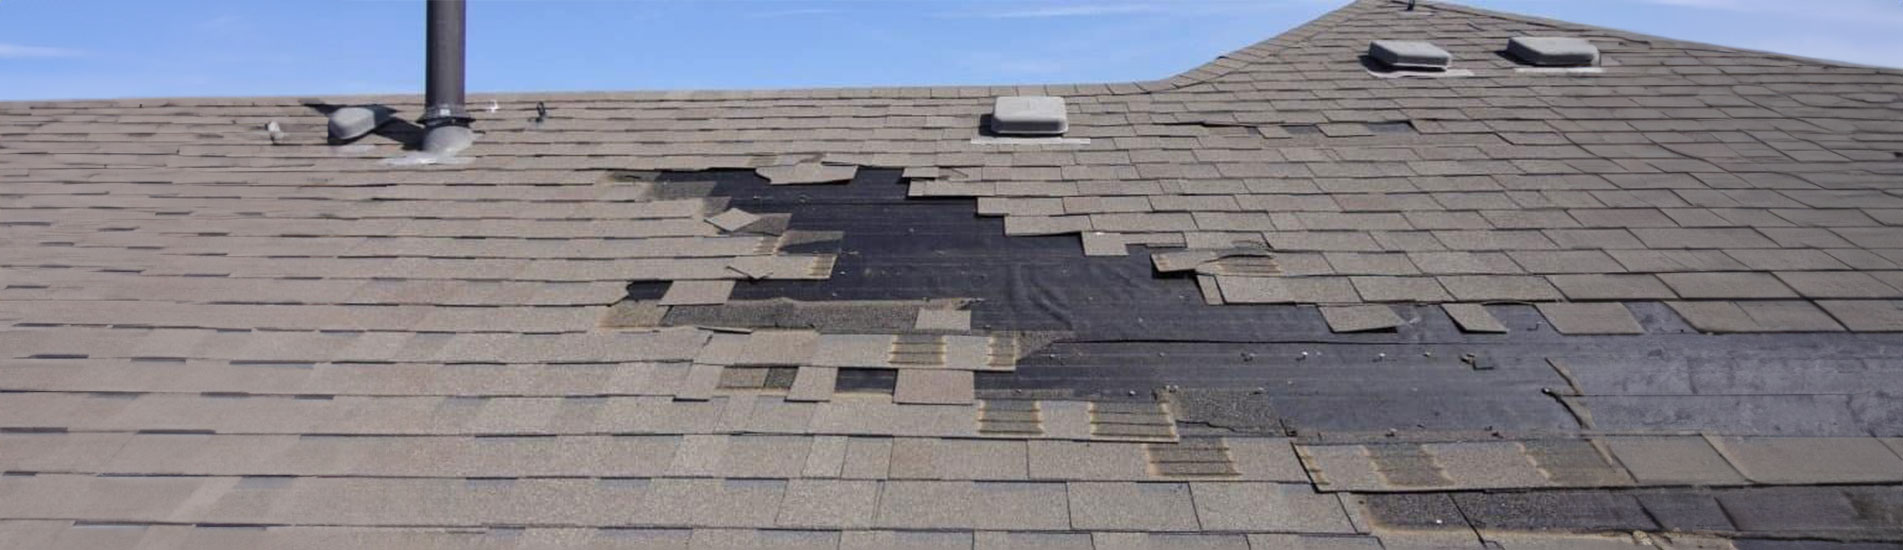 Cherry-Roofing-sometimes-you-might-just-need-your-roof-repaired-in-spots